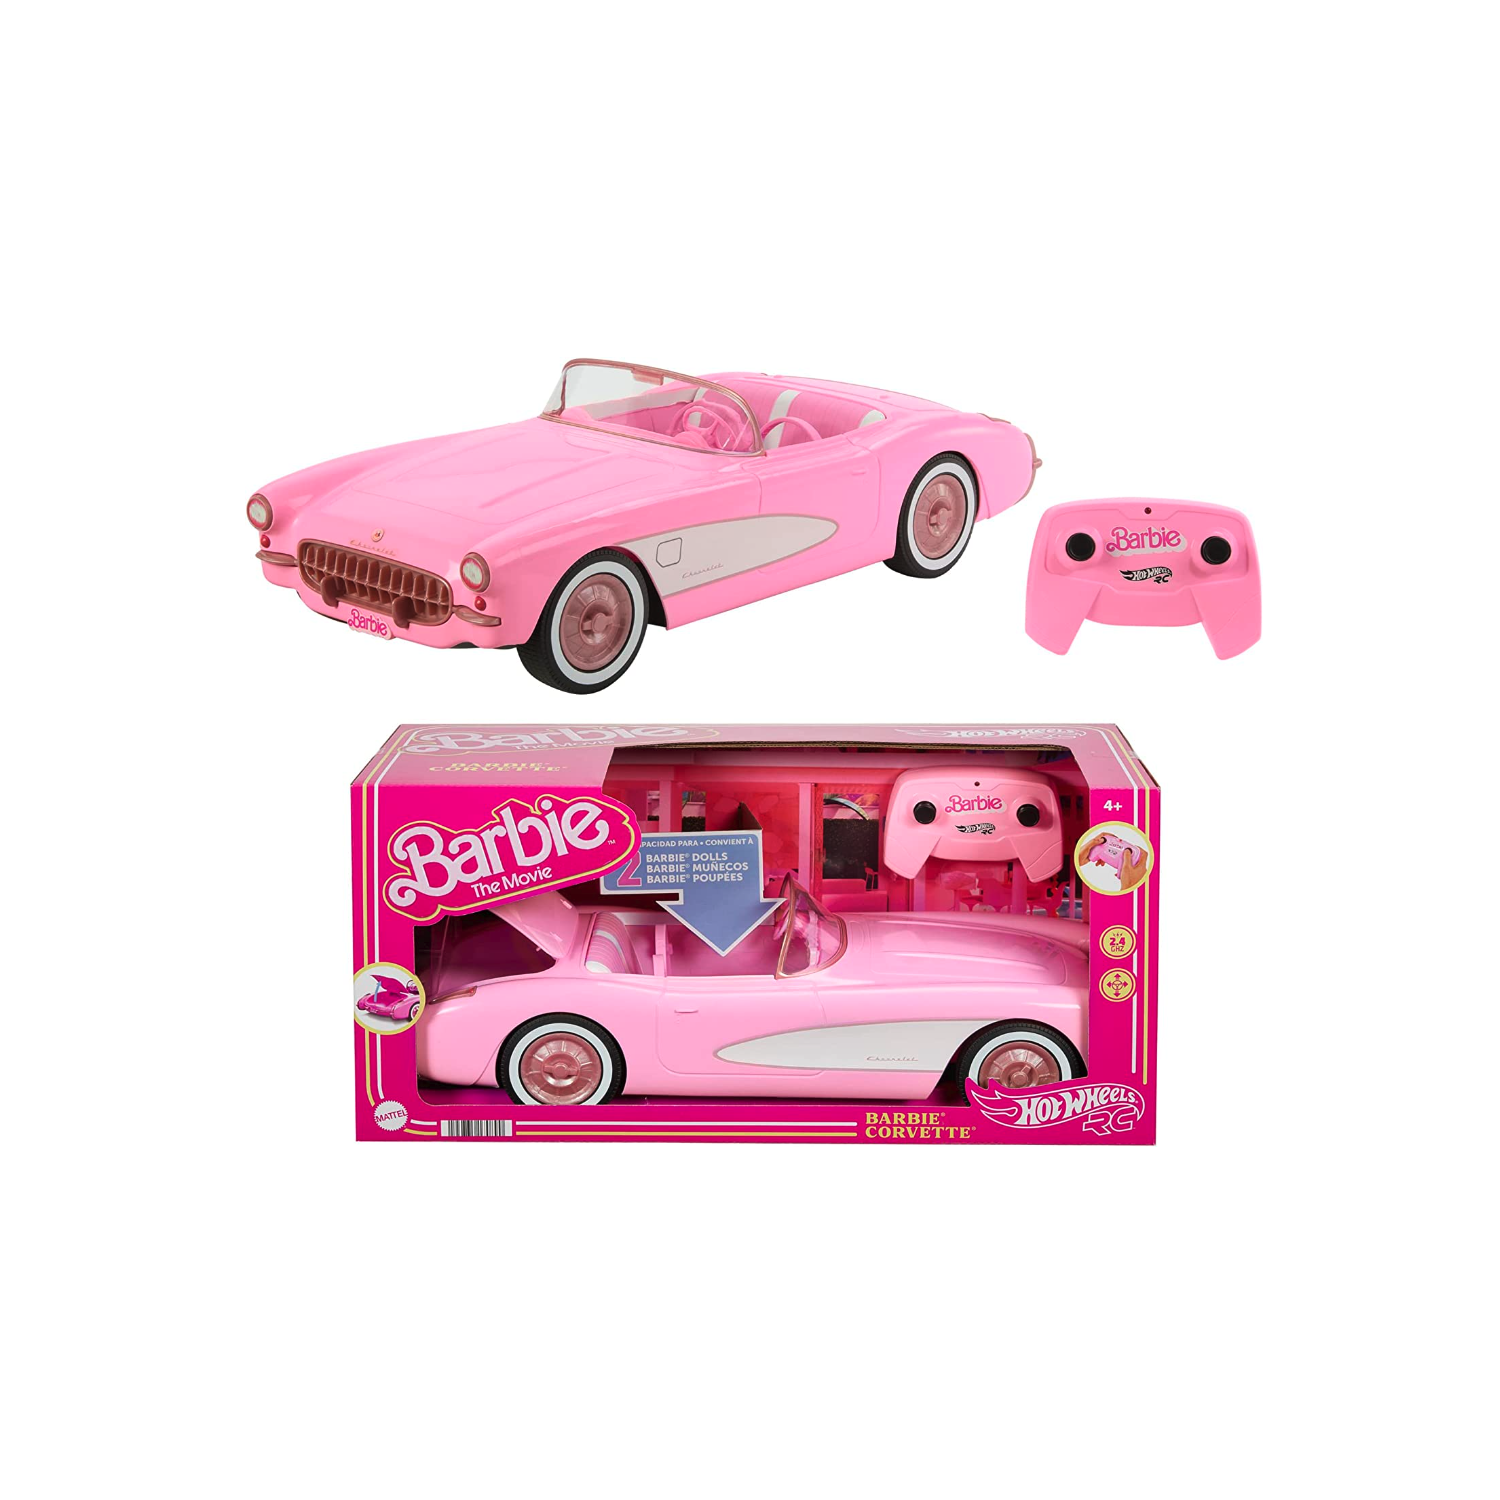 Hot Wheels RC Barbie Corvette, Battery-Operated Remote-Control Toy Car from Barbie The Movie